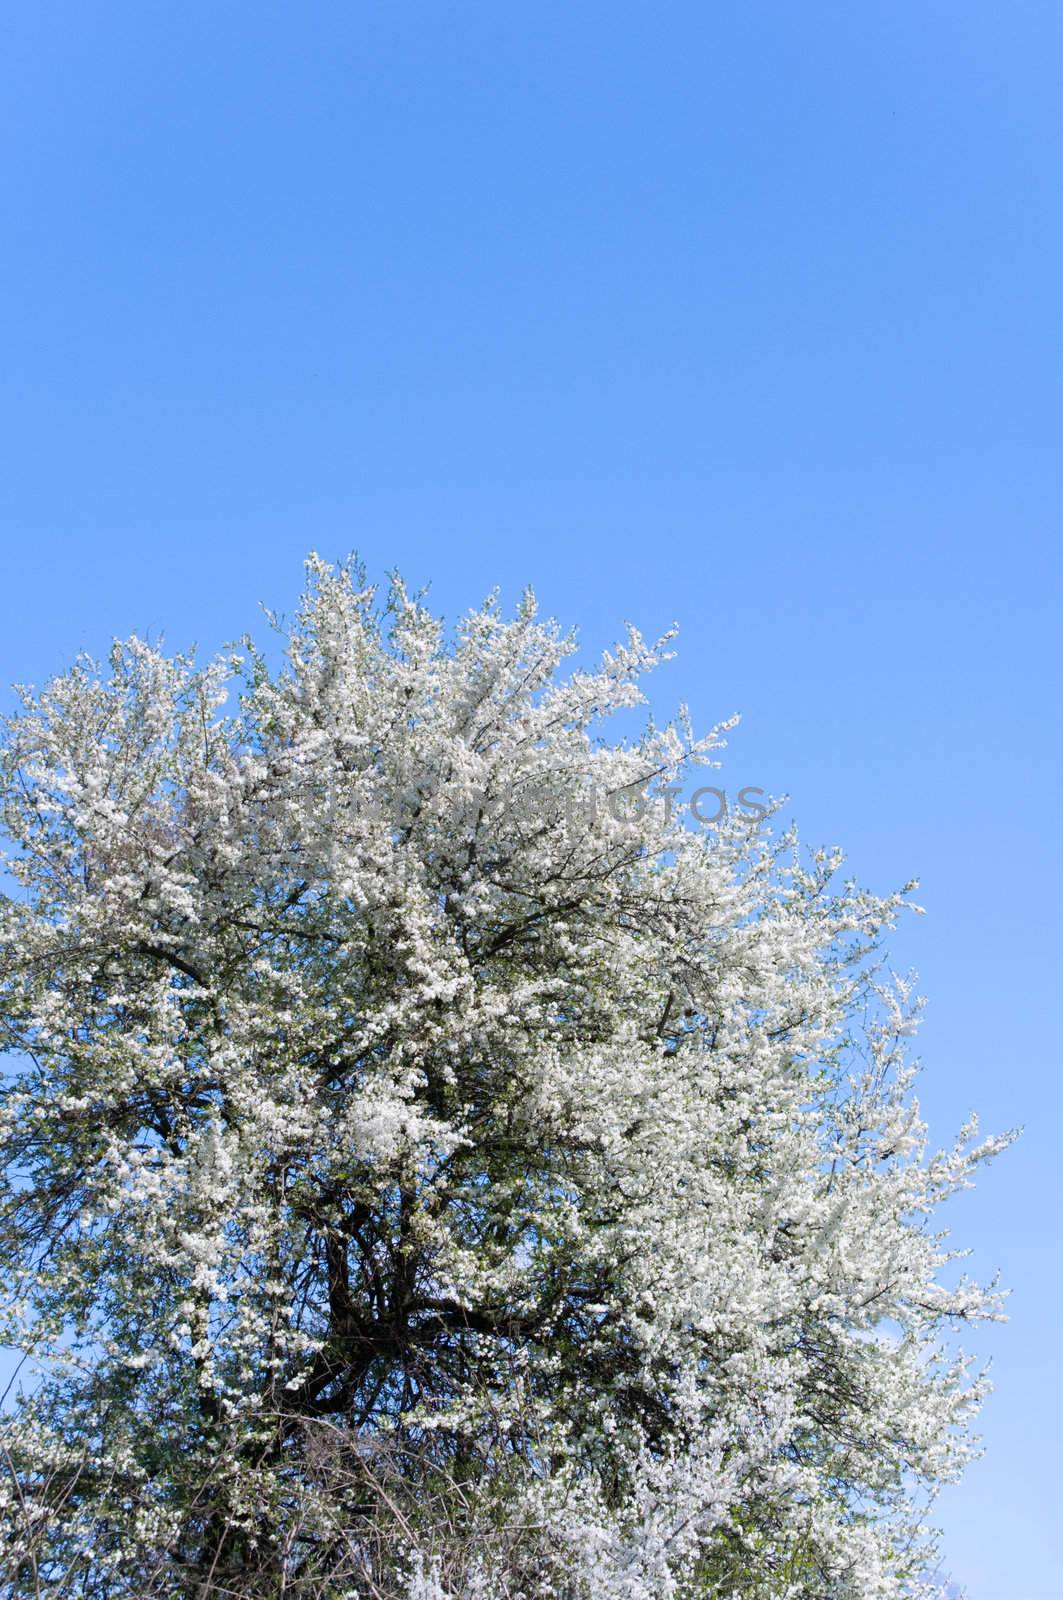 Cherry tree with blooming flowers against blue sky. Copy space